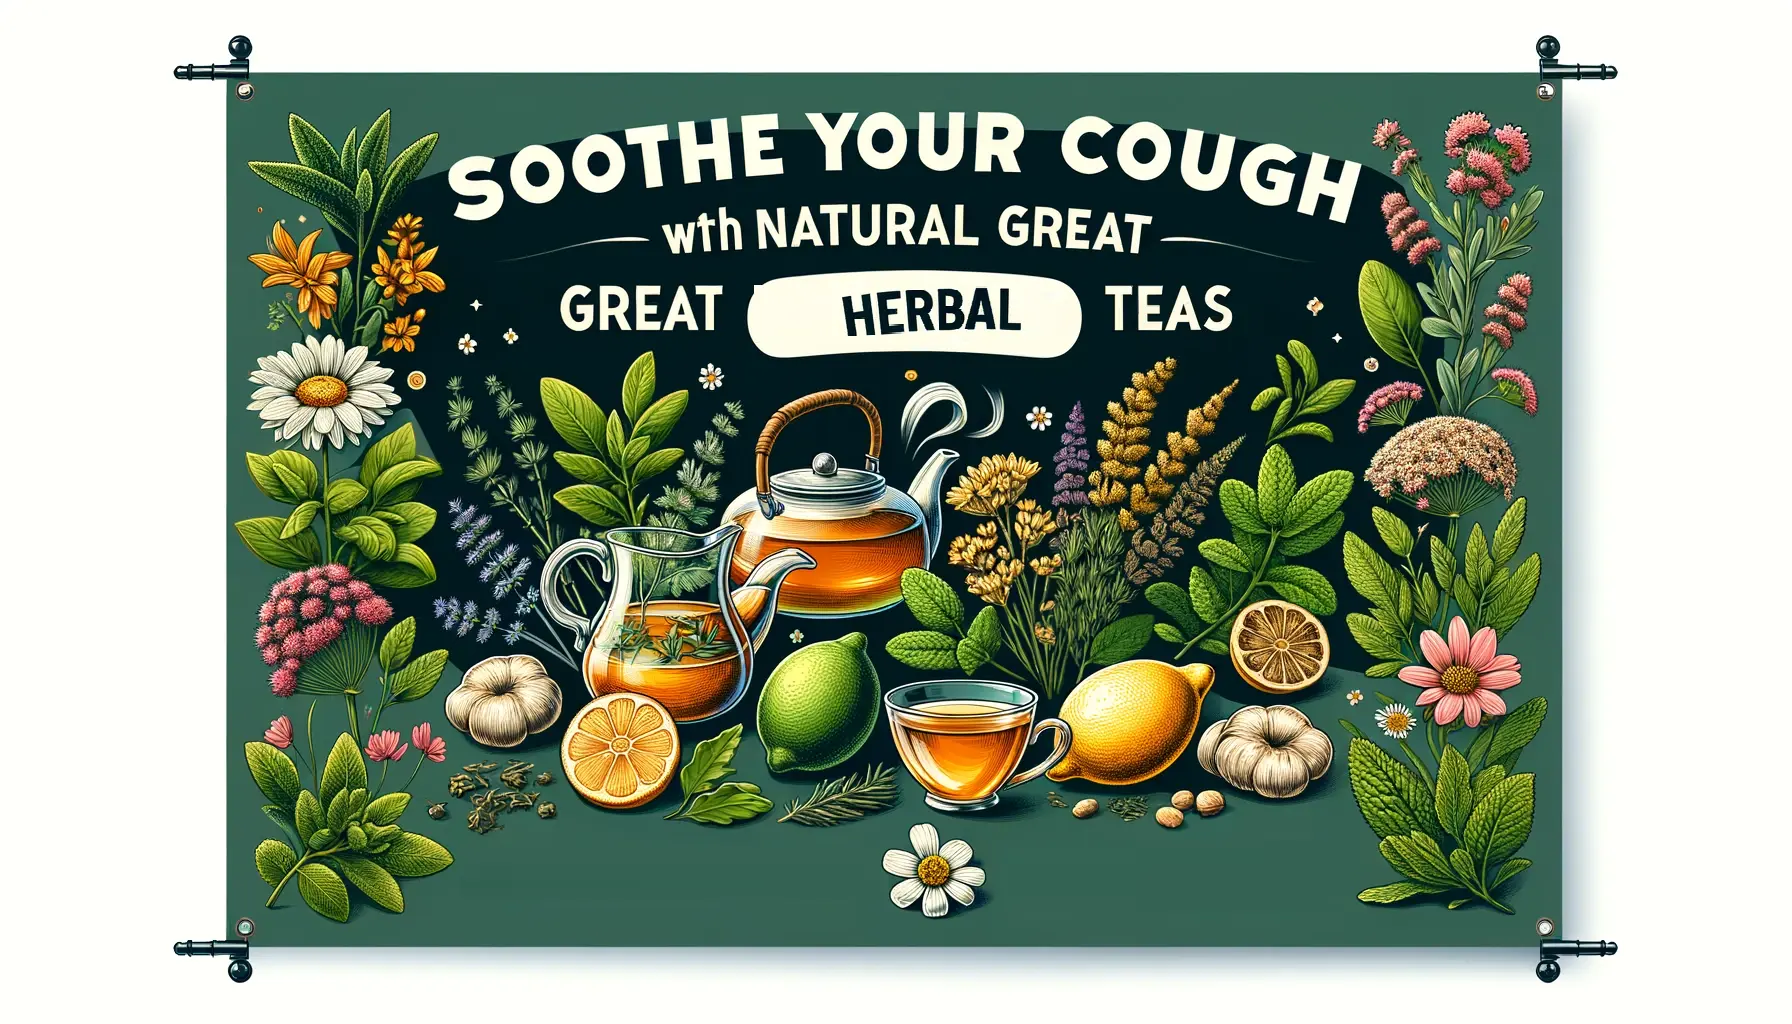 -herbal-teas-aimed-at-soothing-coughs-Soothe-your-Cough-with-Natural-Great-Herbal-Teas.